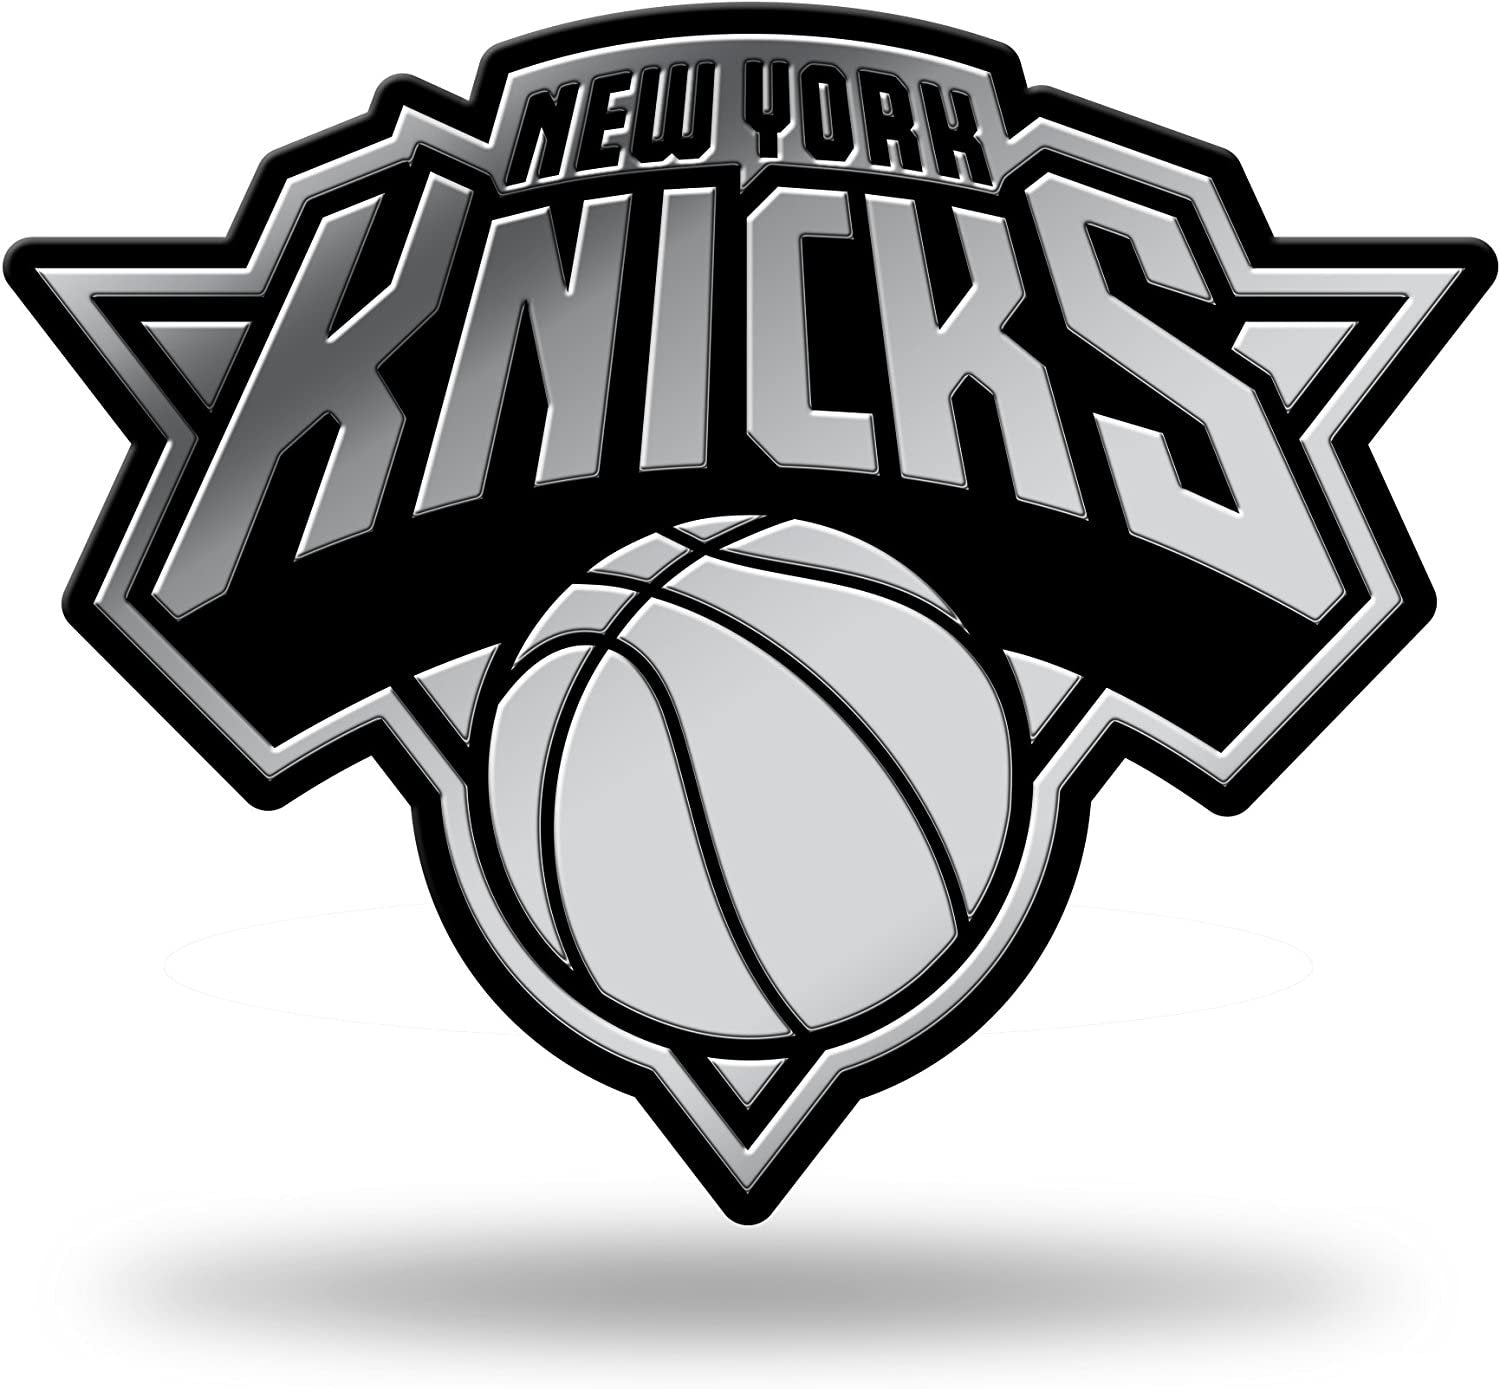 New York Knicks Silver Chrome Color Auto Emblem, Raised Molded Plastic, 3.5 Inch, Adhesive Tape Backing